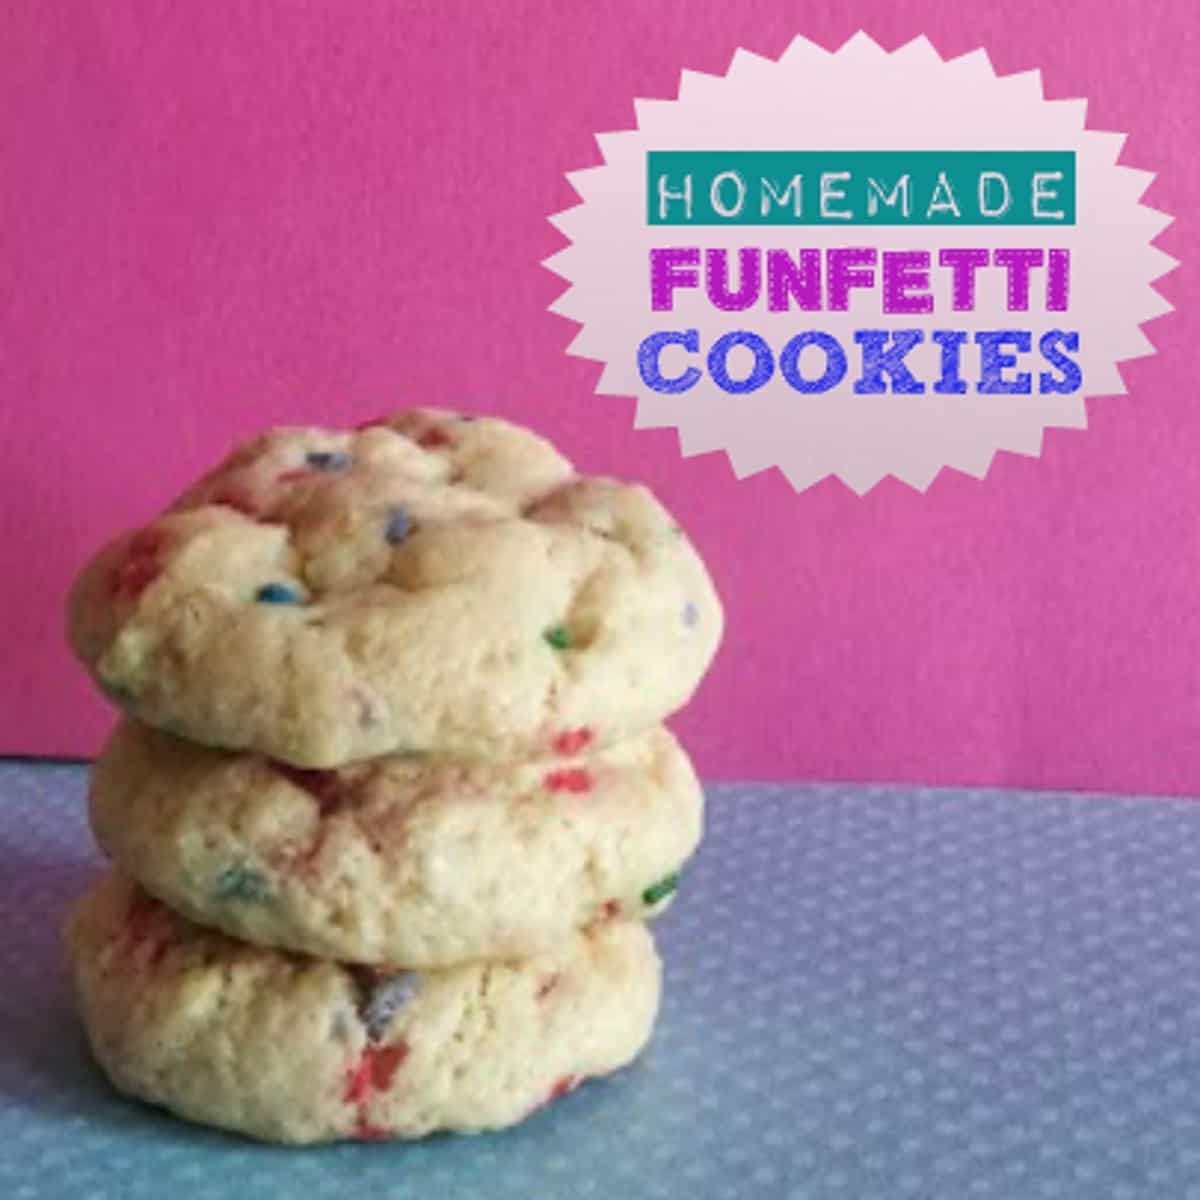 A close-up photo of a stack of funfetti cookies. The cookies are soft and chewy with sprinkles throughout. The sprinkles are brightly colored and include pink, blue, yellow, and green. The cookies are sitting on a white plate.